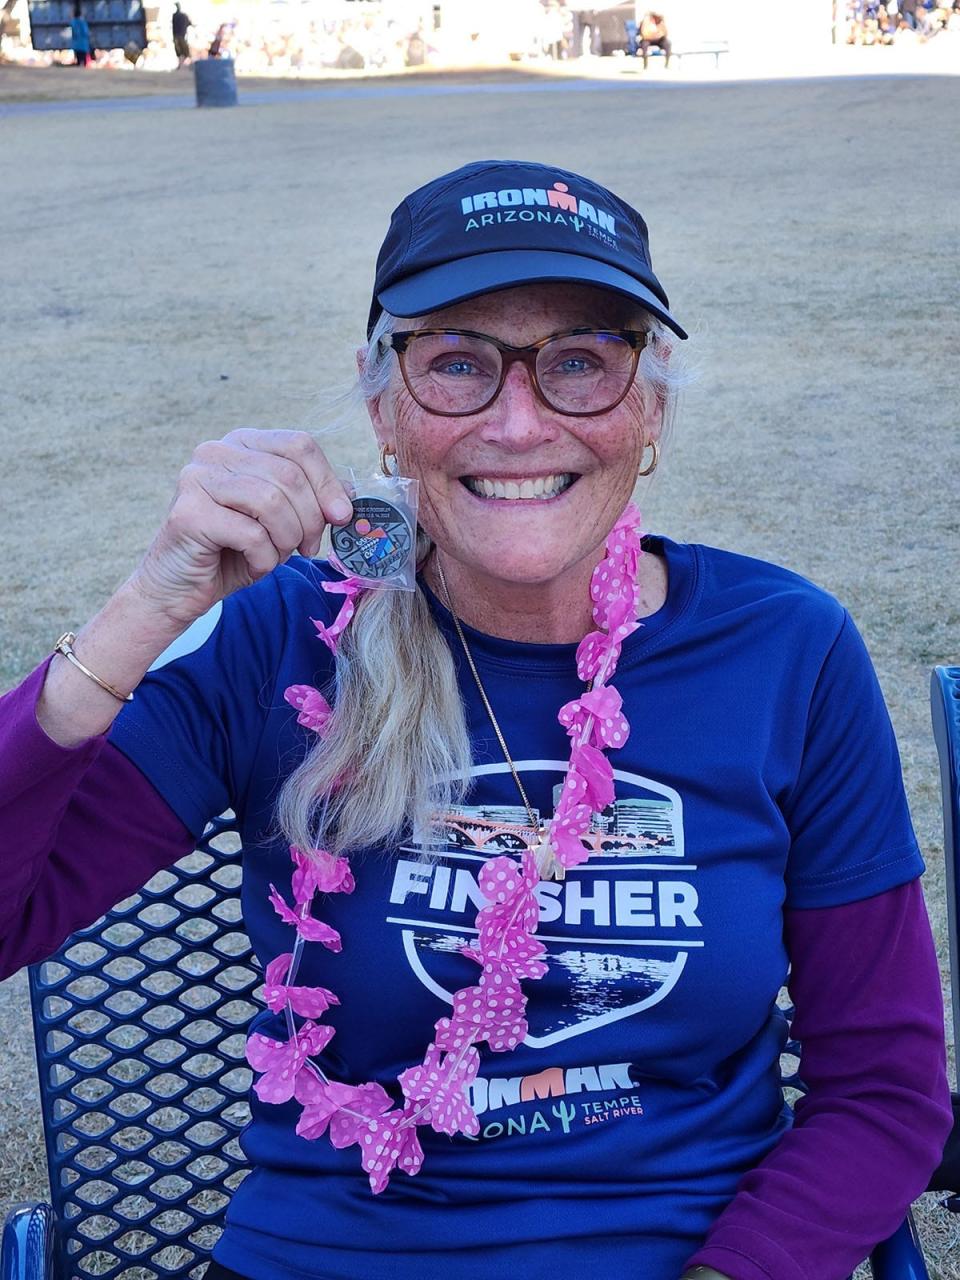 Leslie Maurice holds her finisher medal after completing an Ironman triathlon event in Kona, Hawaii, the tenth such race she's completed.